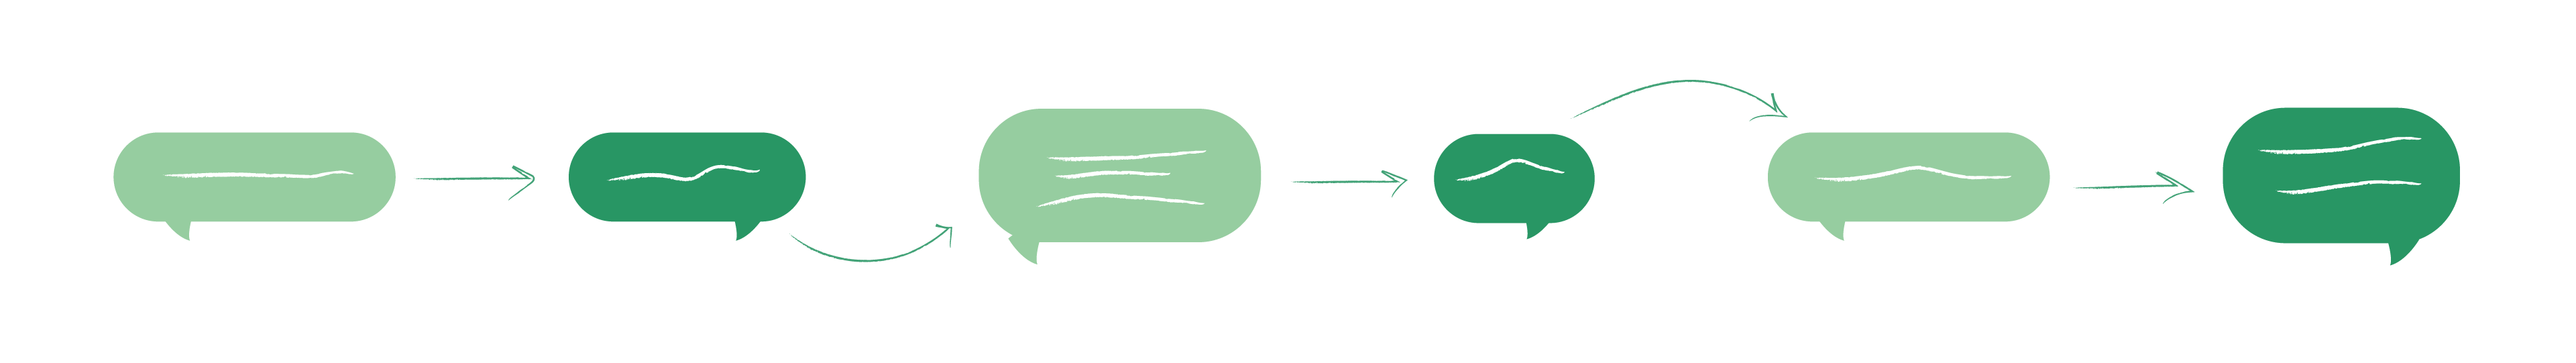 Arrows moving from left to right connect several speech bubbles, connoting flow.